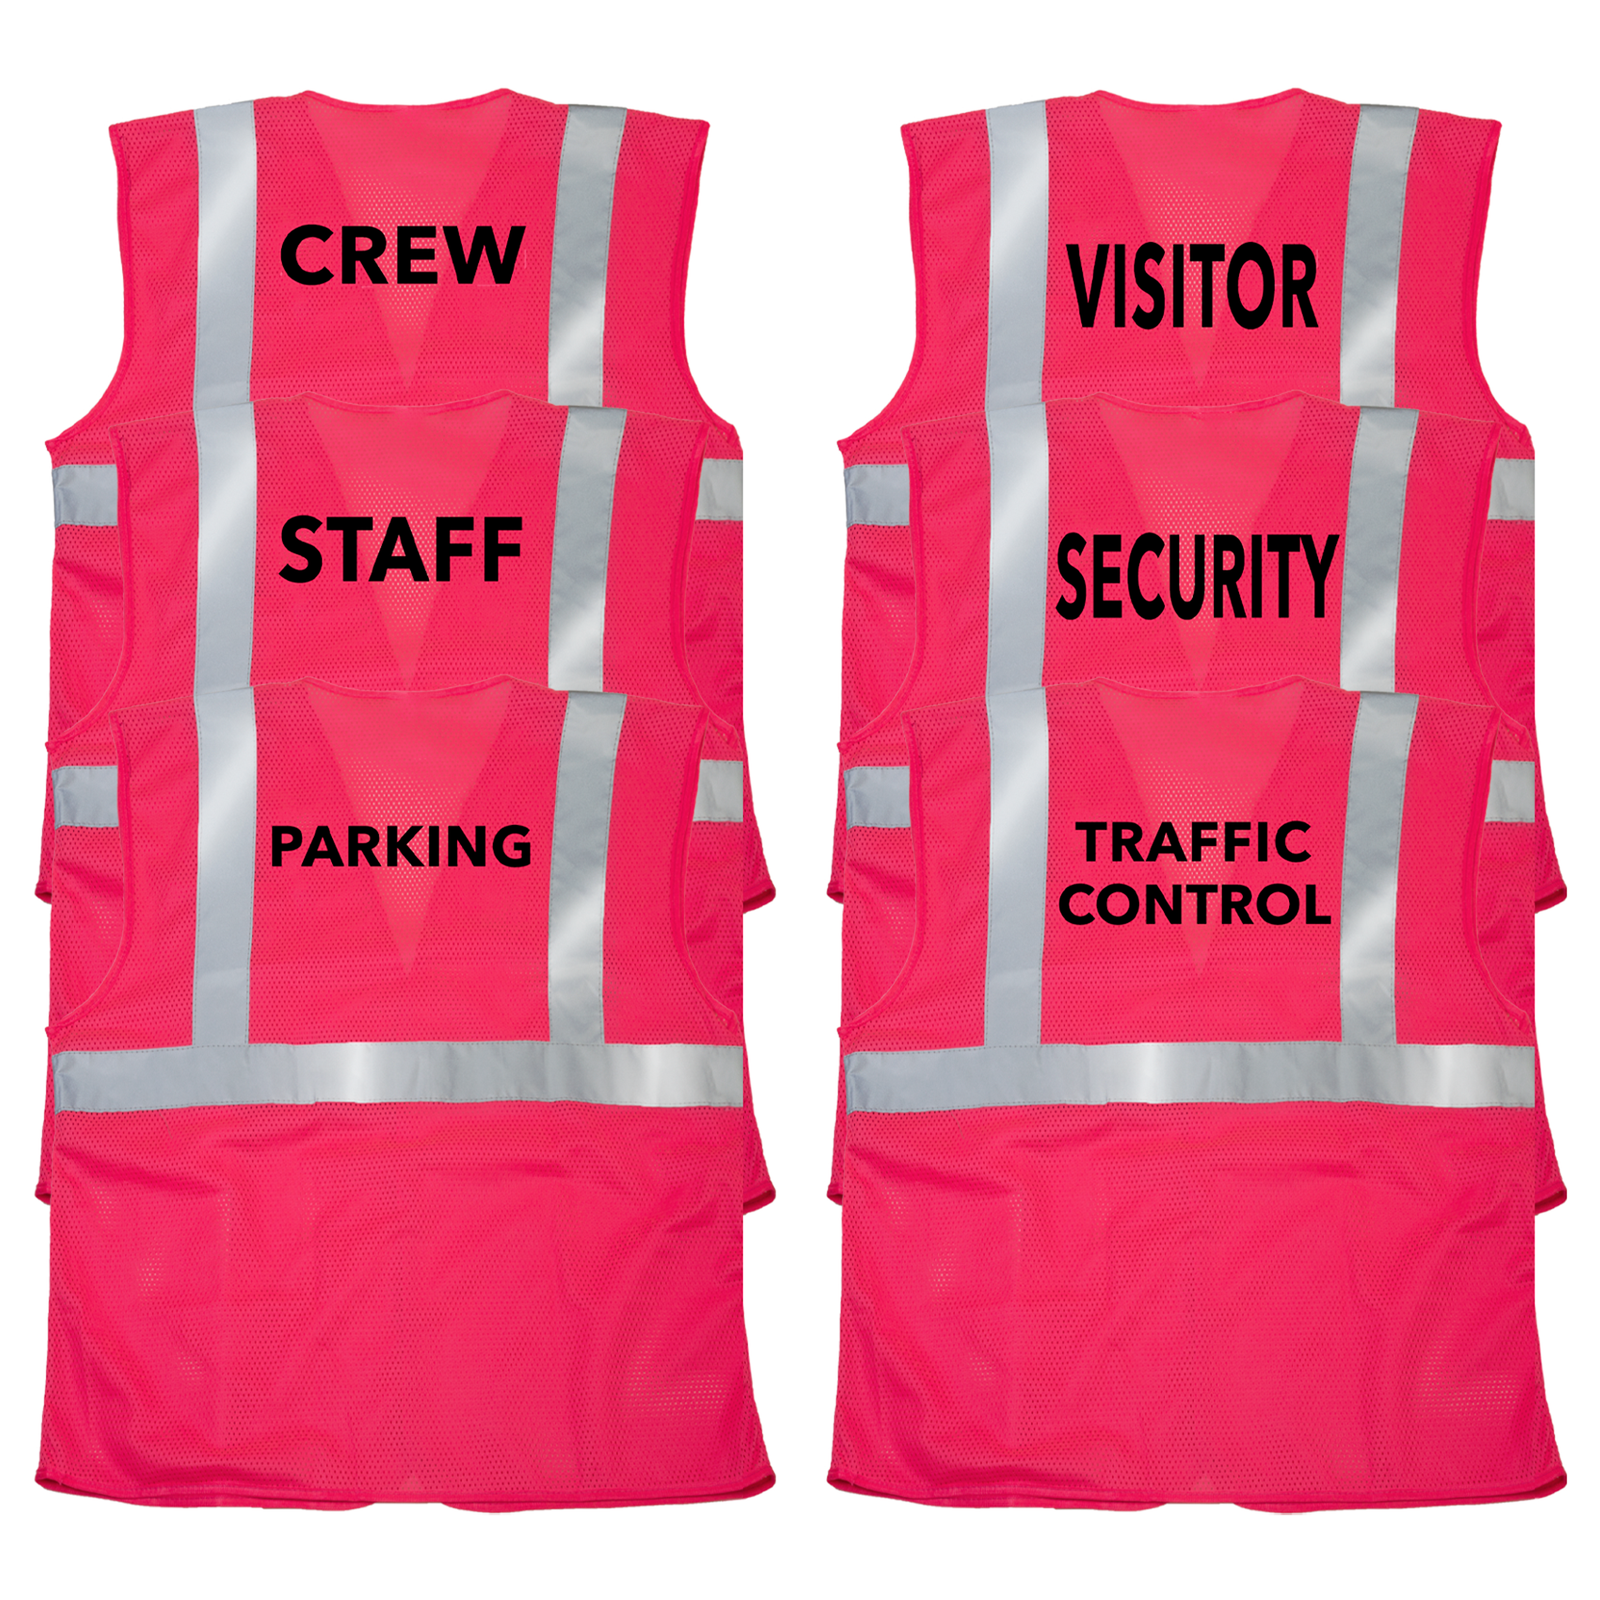 Features 6 pink JORESTECH safety vests printed. Prints on customizable vests read: traffic control, security, visitor, parking, staff and crew